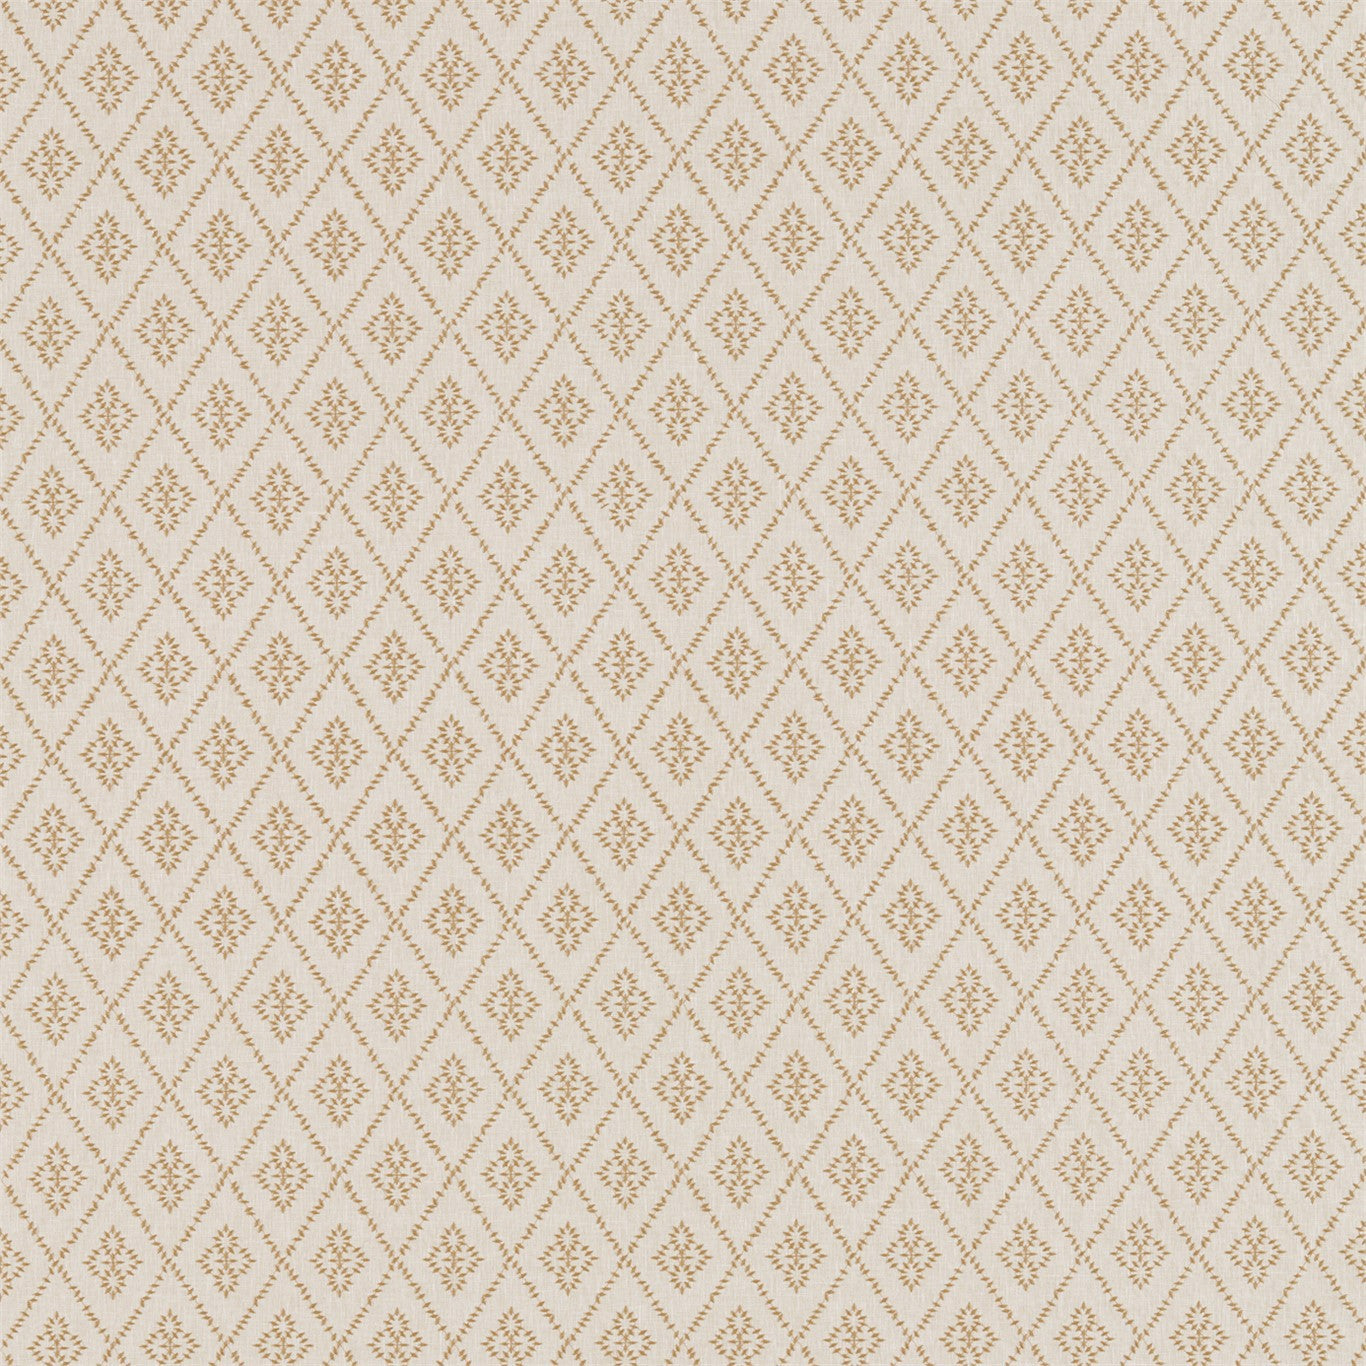 Caraway Fabric by Sanderson Home - DHPO236428 - Barley